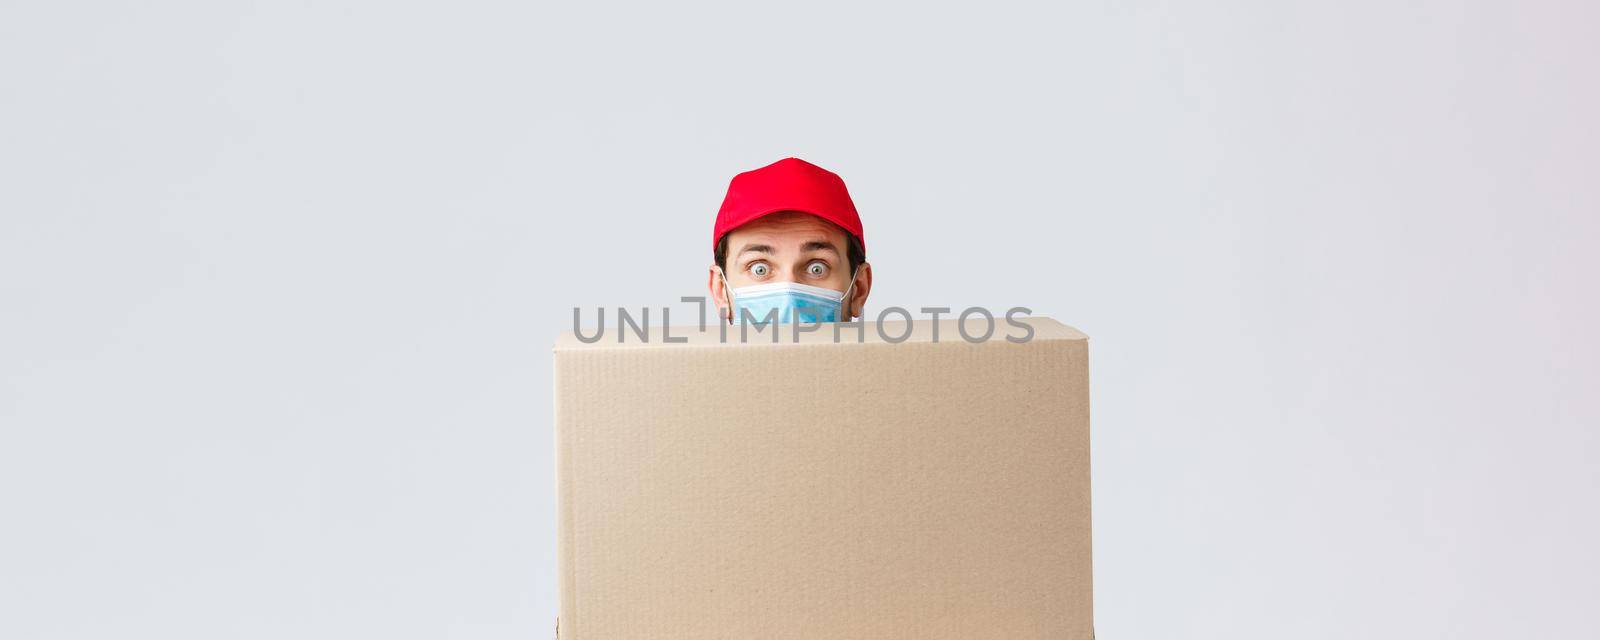 Packages and parcels delivery, covid-19 quarantine and transfer orders. Clumsy cute courier first day at job, hiding behind large box, wear face mask and red uniform cap, grey background by Benzoix